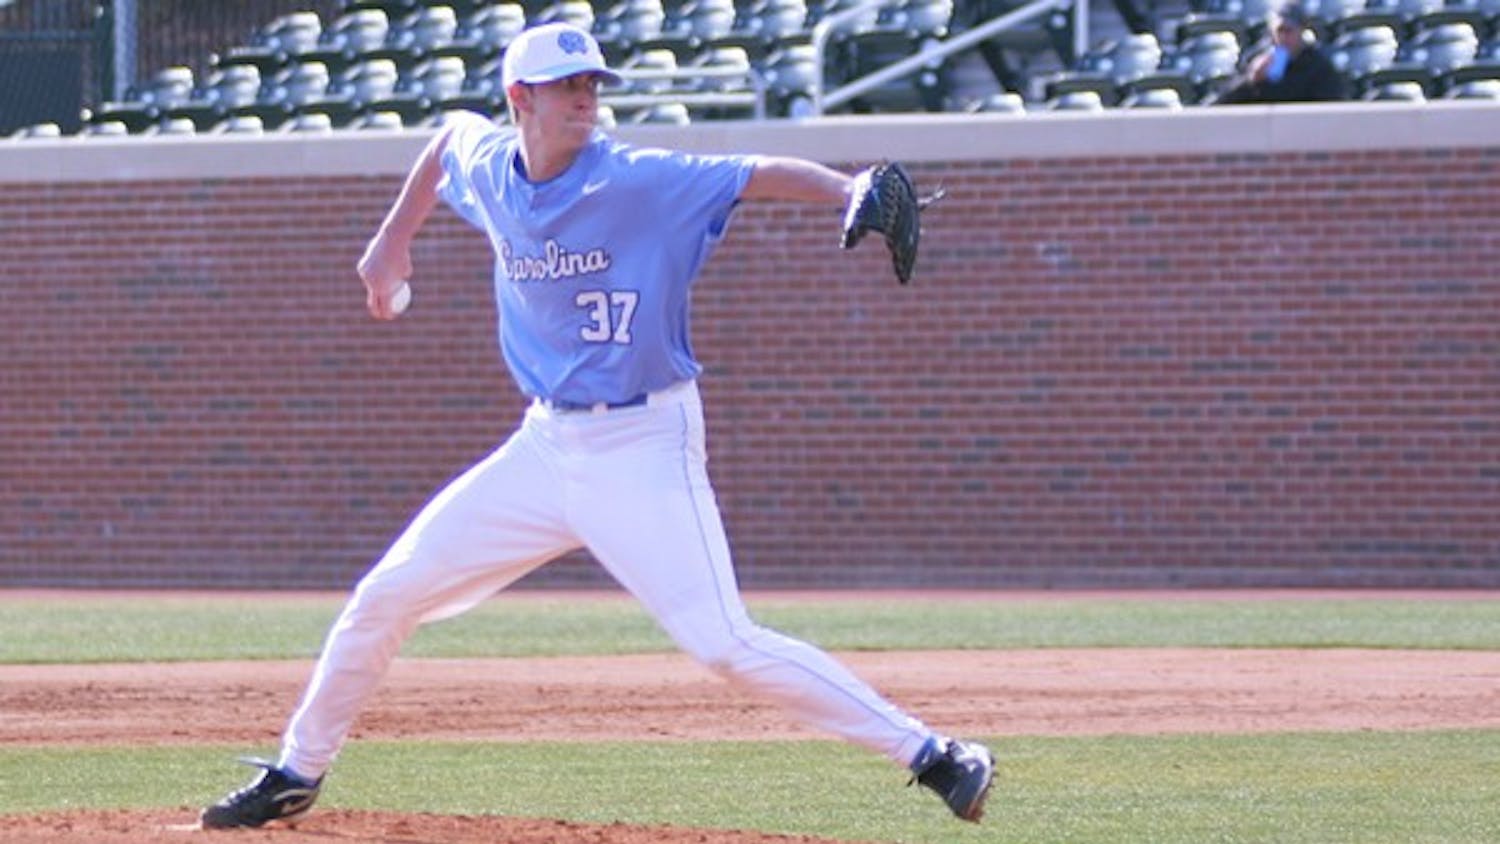 Freshman Chris Munnelly was put in as pitcher in the third inning. He was one of four pitches the UNC used. DTH/Sara Gregory